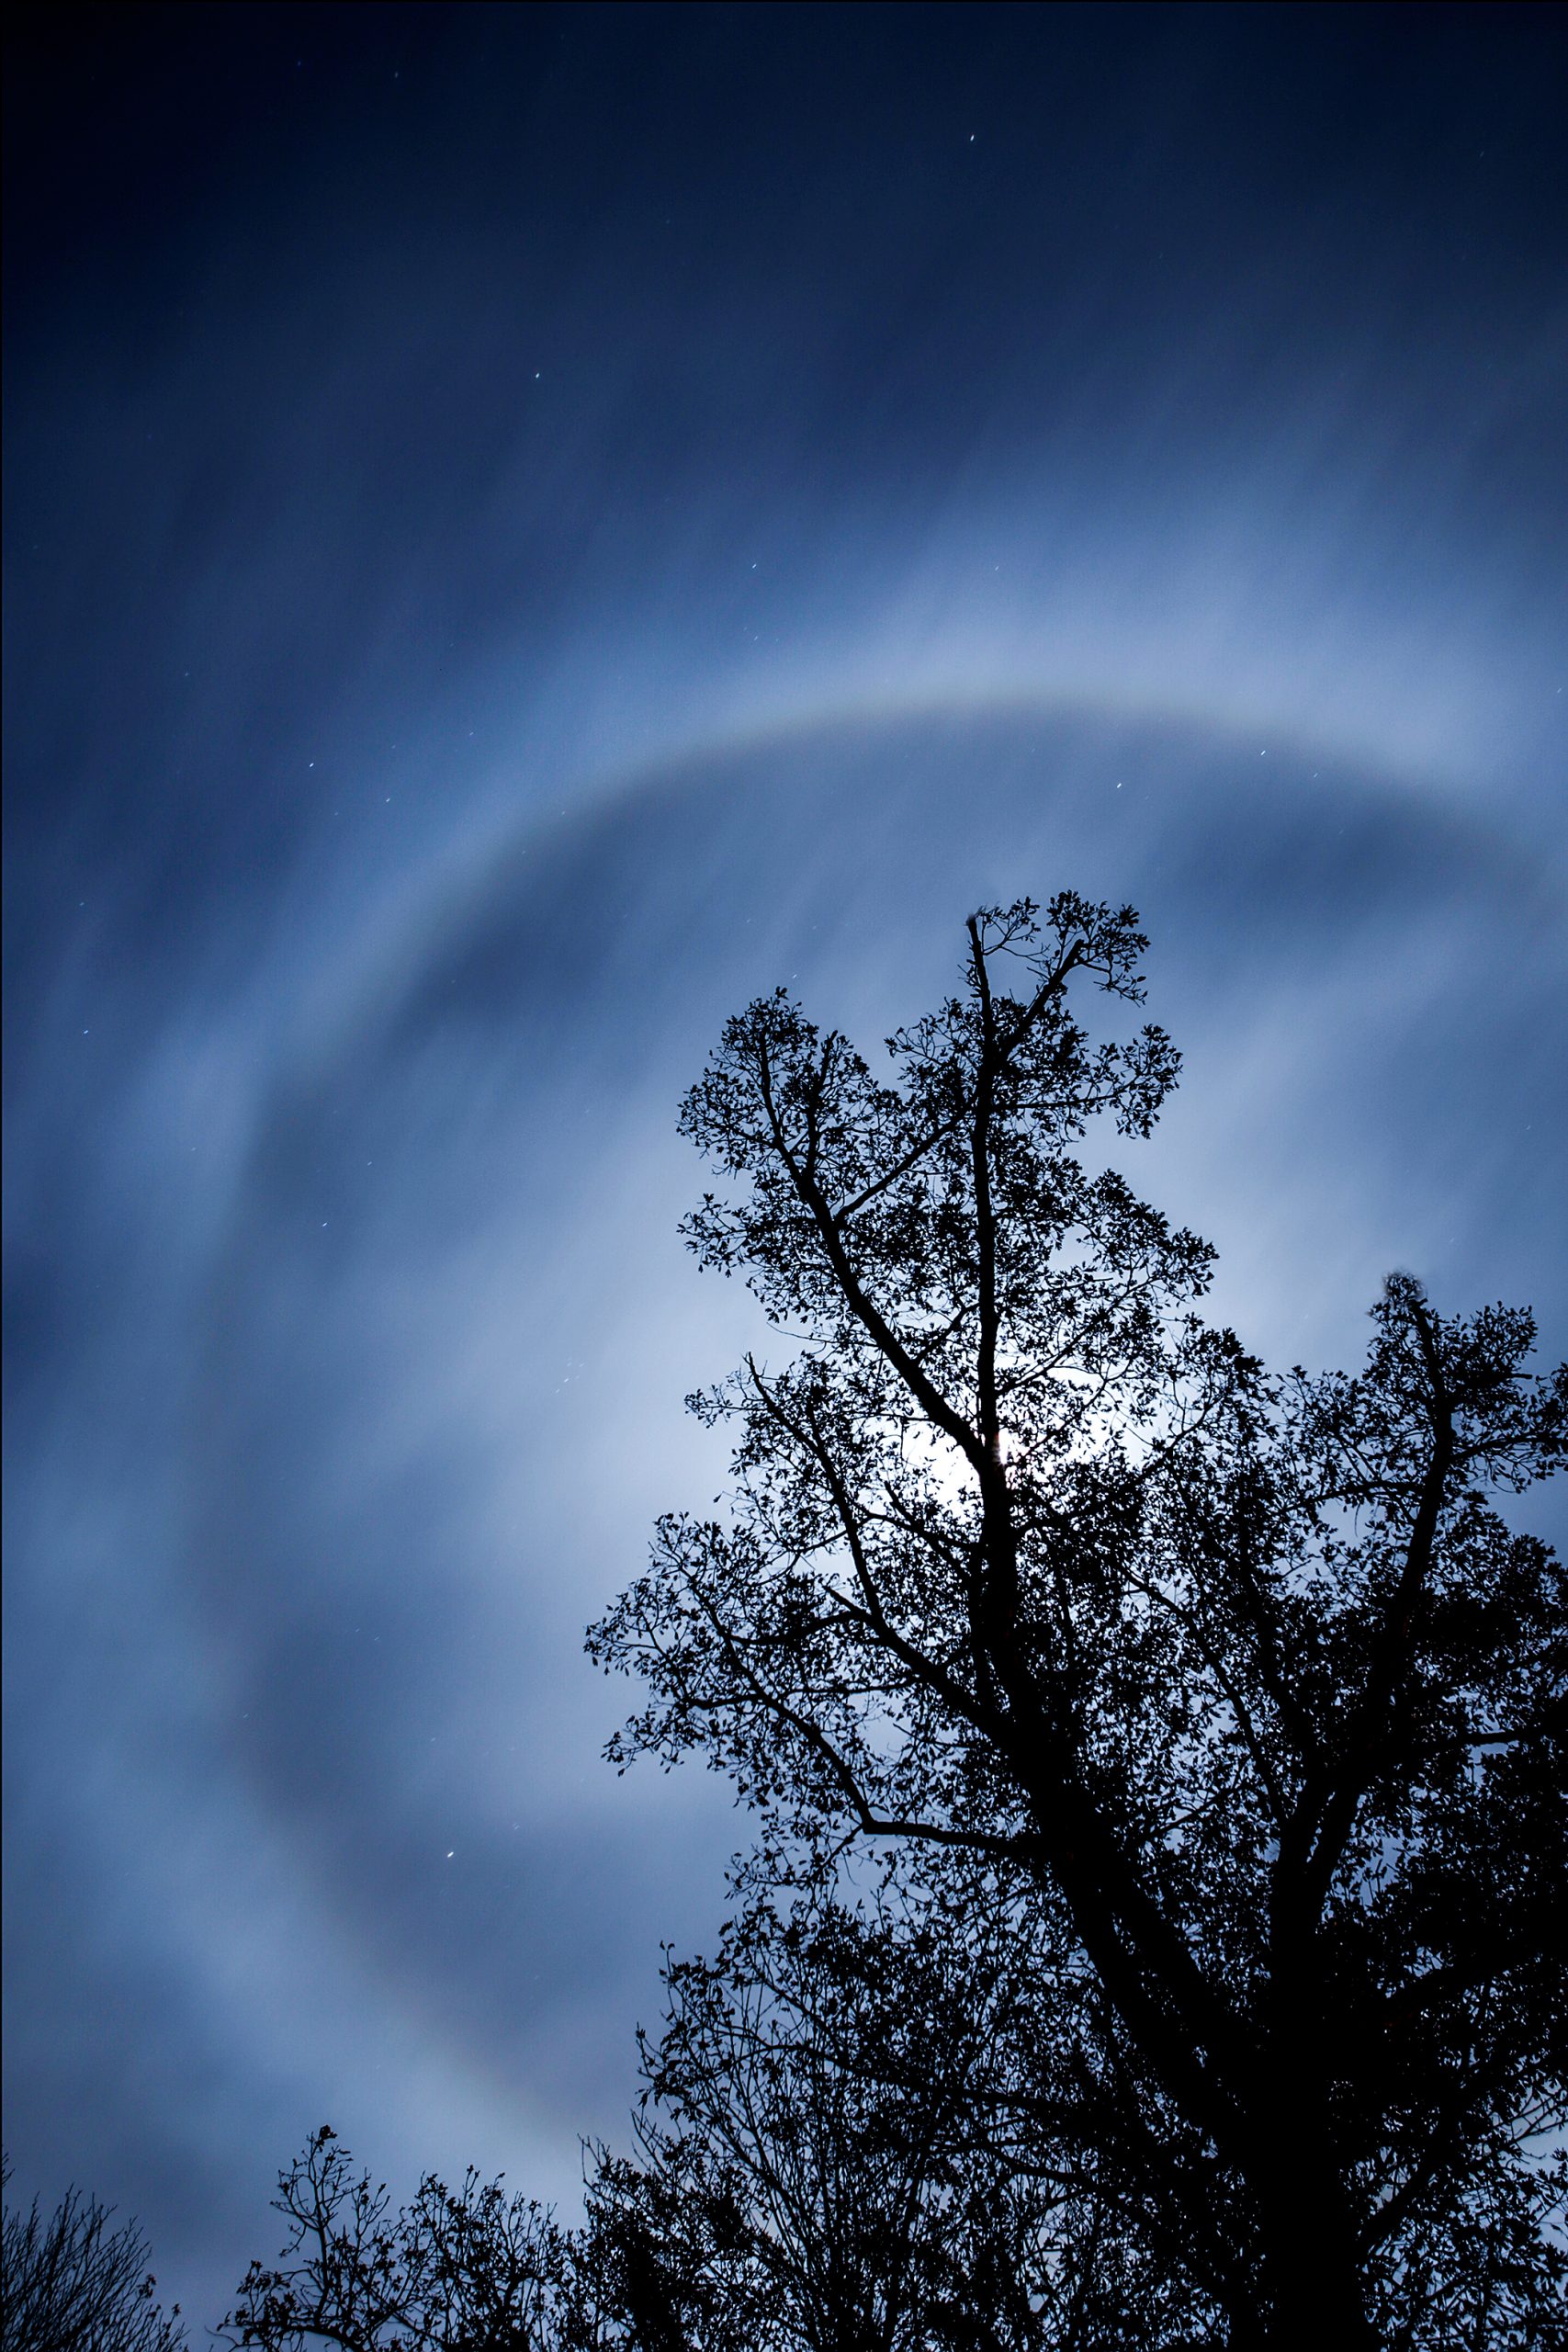 Moon rings, or halos, are created when ice crystals in the atmosphere are refracted by moonlight, similar to rainbows during daylight hours.